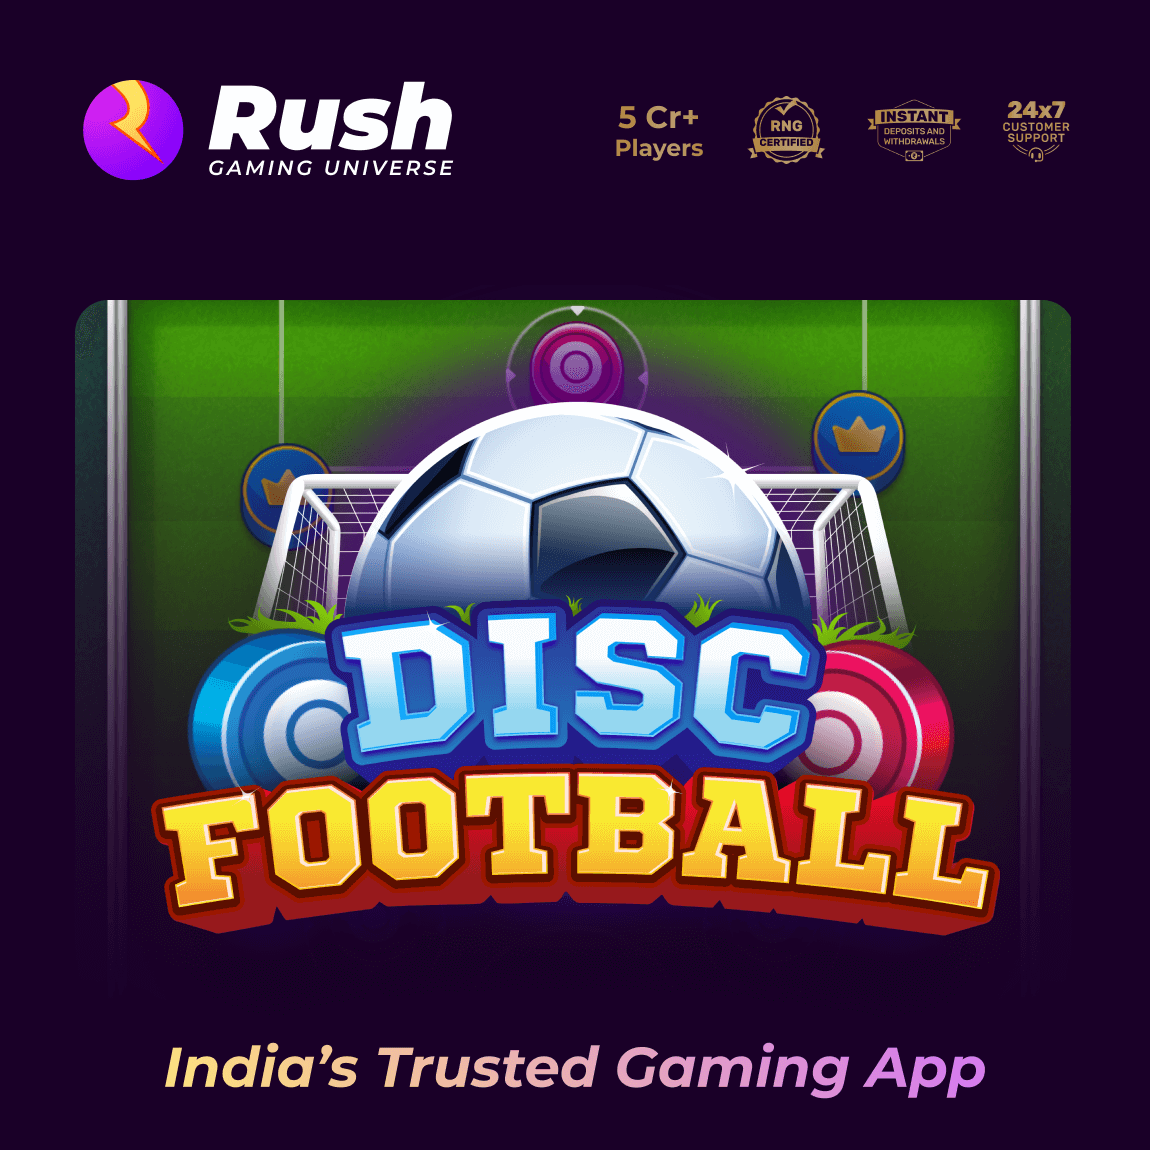 Sports Games - Download Rush & Play Sports Games Online with Friends & Win  Cash